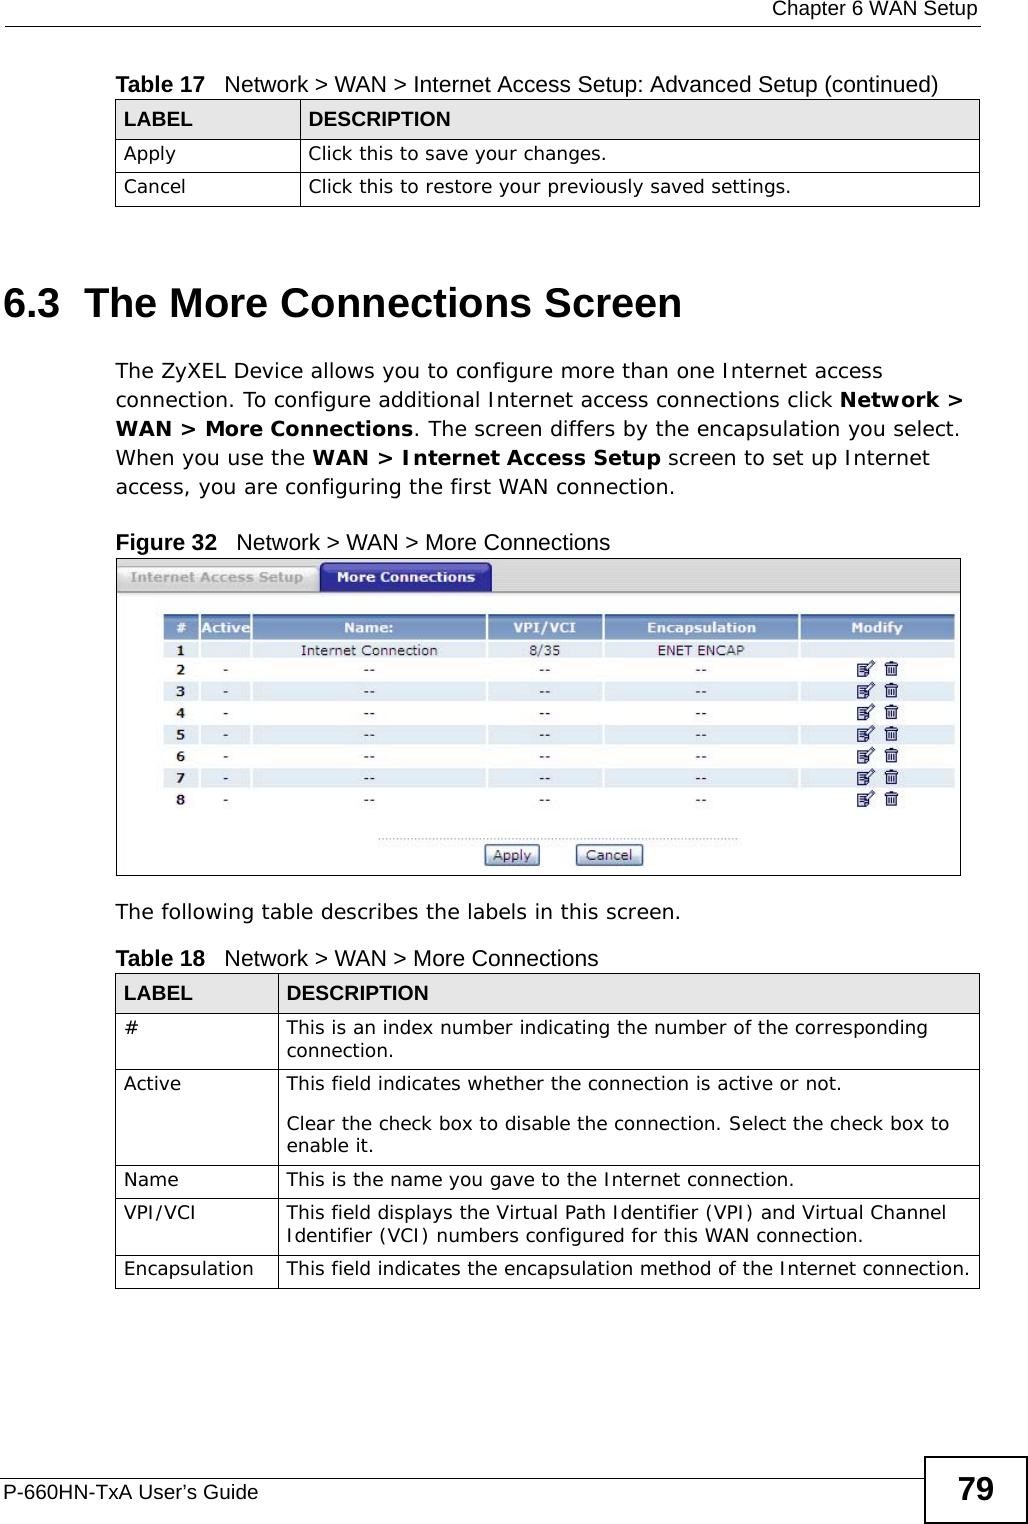  Chapter 6 WAN SetupP-660HN-TxA User’s Guide 796.3  The More Connections ScreenThe ZyXEL Device allows you to configure more than one Internet access connection. To configure additional Internet access connections click Network &gt; WAN &gt; More Connections. The screen differs by the encapsulation you select. When you use the WAN &gt; Internet Access Setup screen to set up Internet access, you are configuring the first WAN connection.Figure 32   Network &gt; WAN &gt; More ConnectionsThe following table describes the labels in this screen.  Apply Click this to save your changes. Cancel Click this to restore your previously saved settings.Table 17   Network &gt; WAN &gt; Internet Access Setup: Advanced Setup (continued)LABEL DESCRIPTIONTable 18   Network &gt; WAN &gt; More ConnectionsLABEL DESCRIPTION# This is an index number indicating the number of the corresponding connection.Active This field indicates whether the connection is active or not.Clear the check box to disable the connection. Select the check box to enable it.Name This is the name you gave to the Internet connection.VPI/VCI This field displays the Virtual Path Identifier (VPI) and Virtual Channel Identifier (VCI) numbers configured for this WAN connection. Encapsulation This field indicates the encapsulation method of the Internet connection.